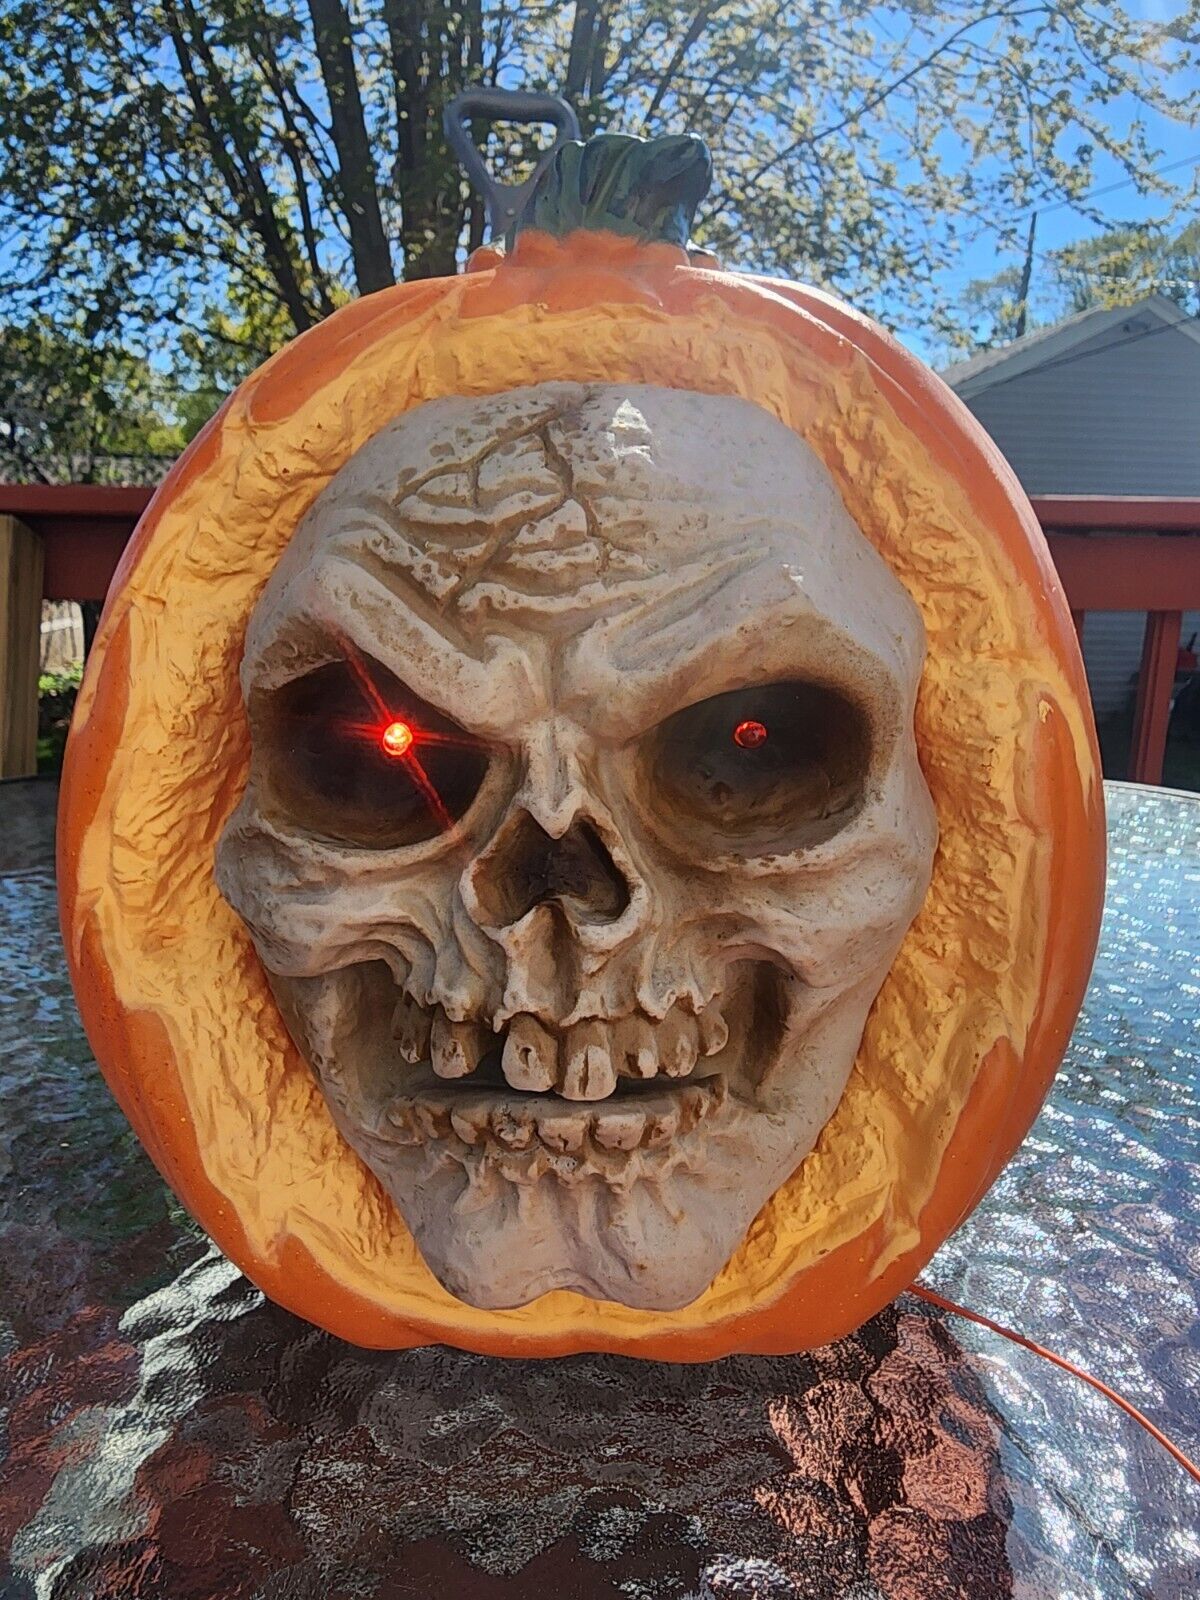 2010 Magic Power Co Motion Activated Pumpkin Talking Mouth Skull Halloween